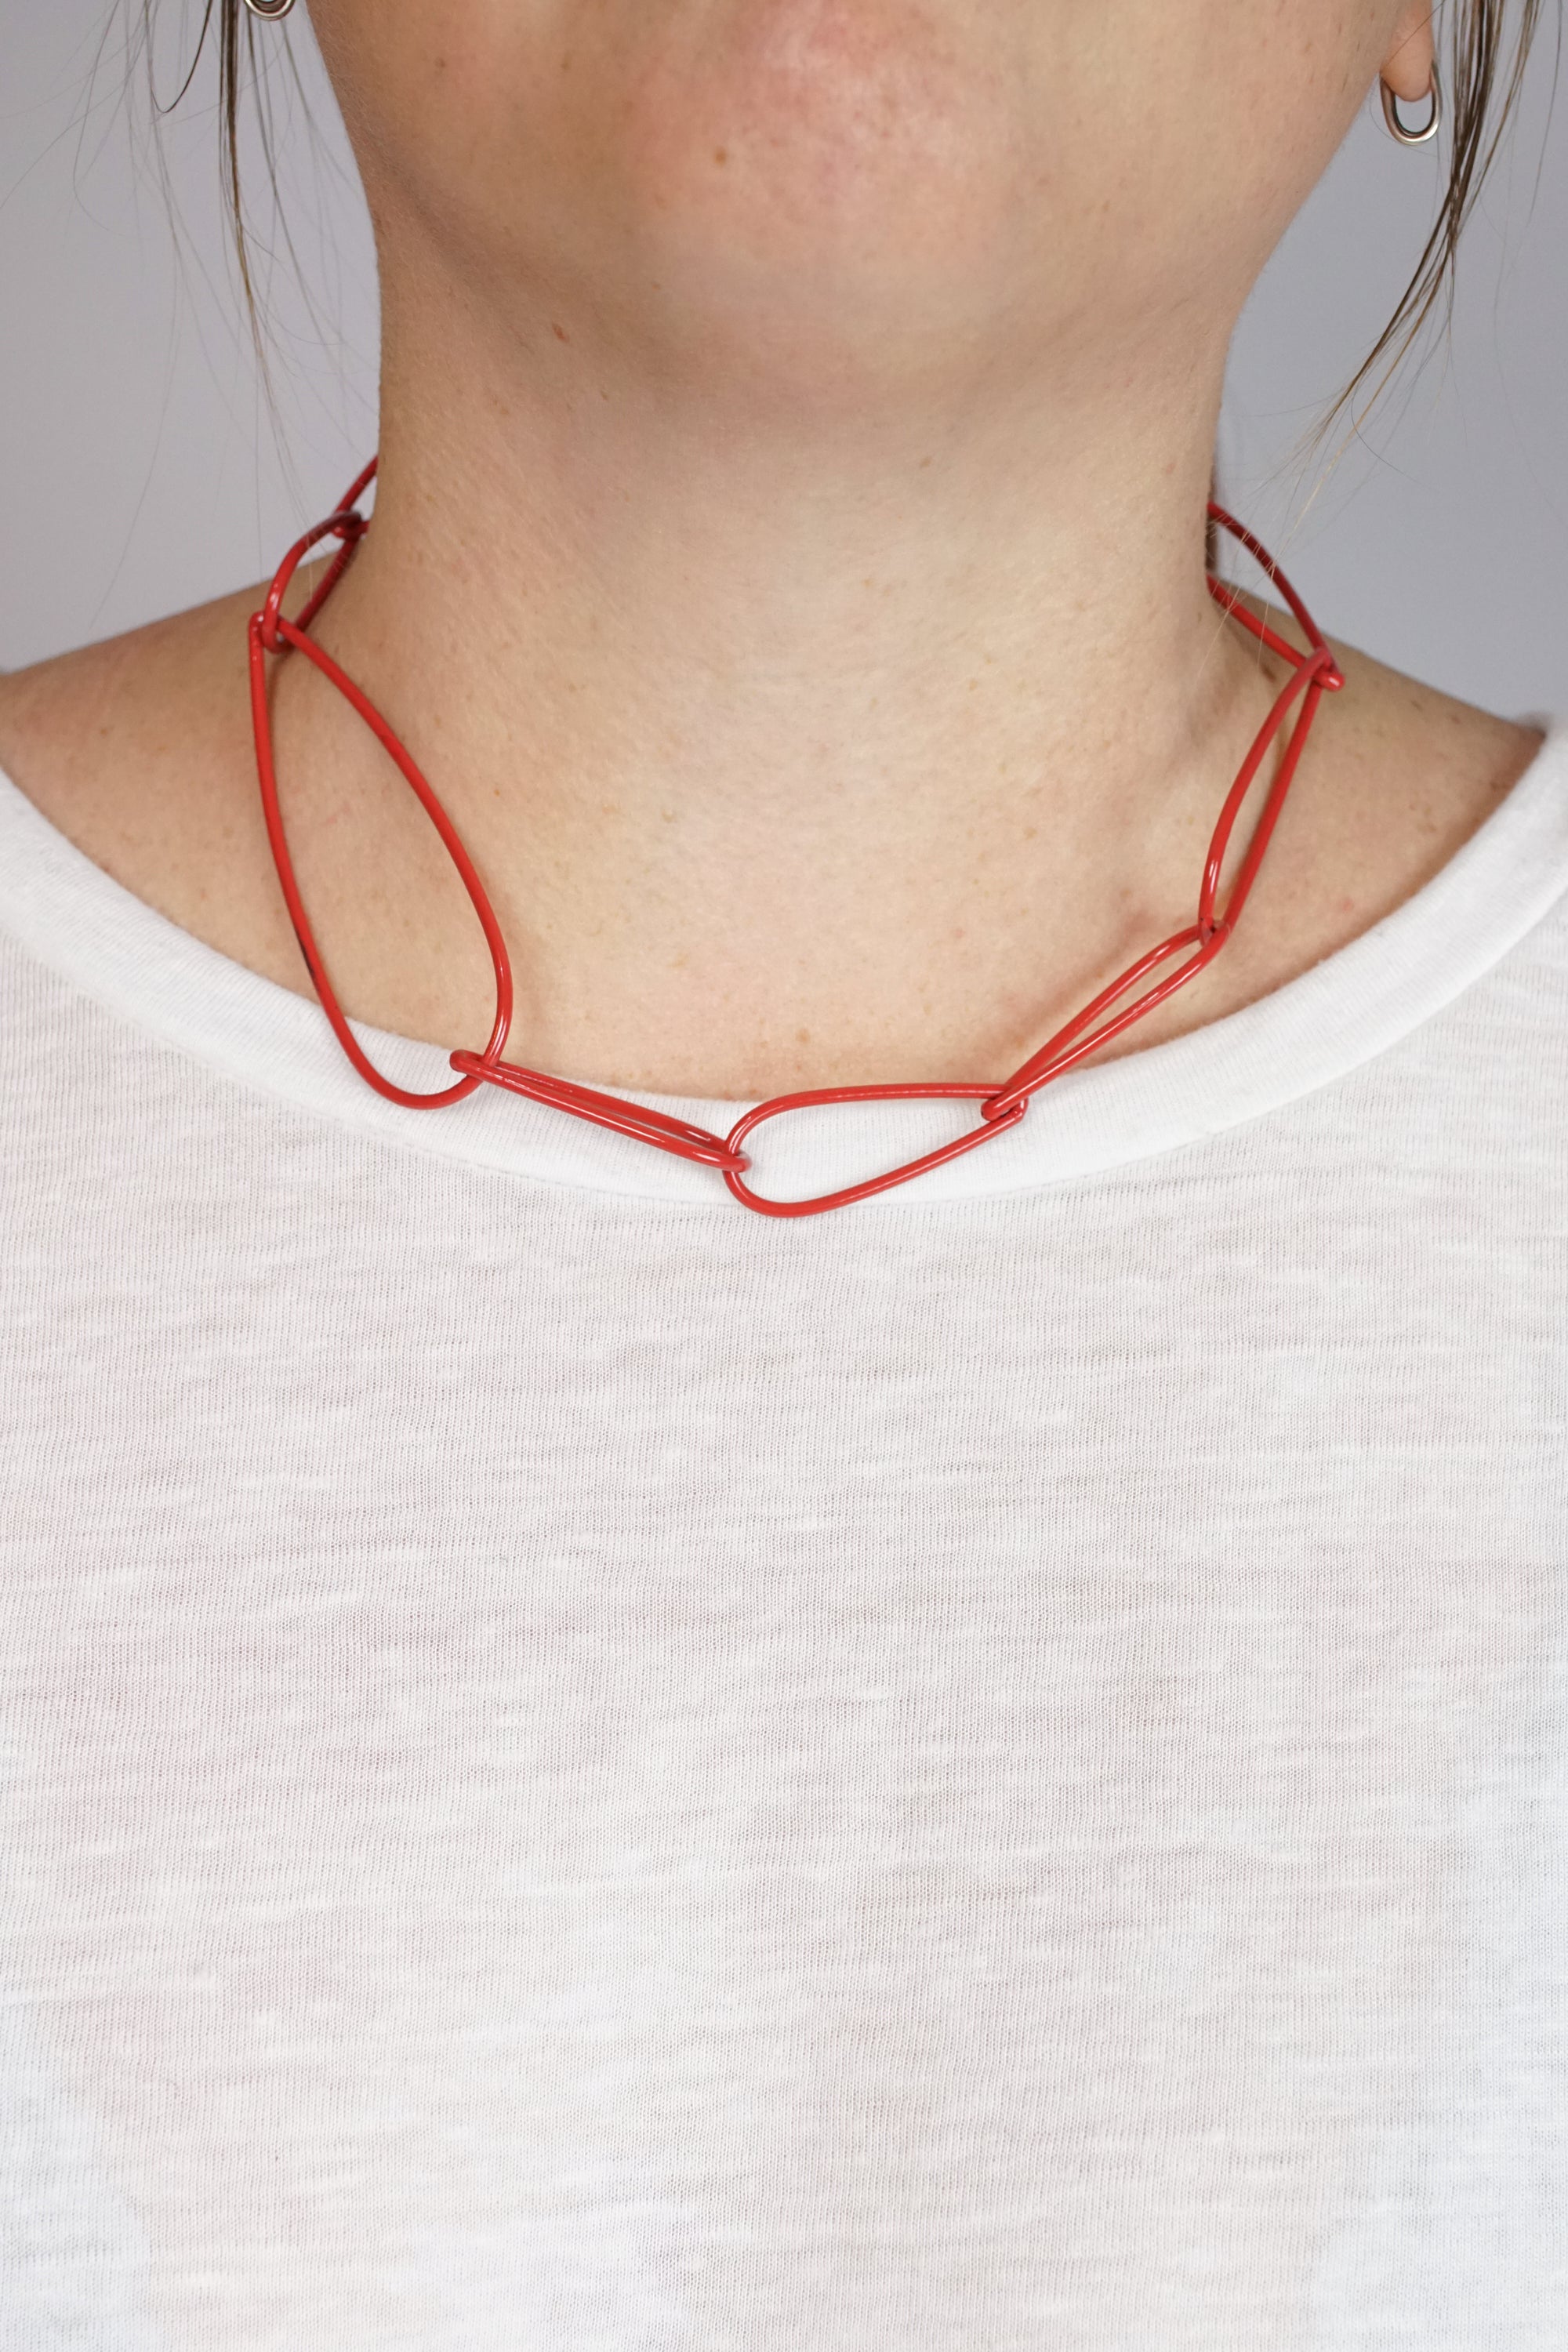 Modular Necklace No. 2 in Coral Red